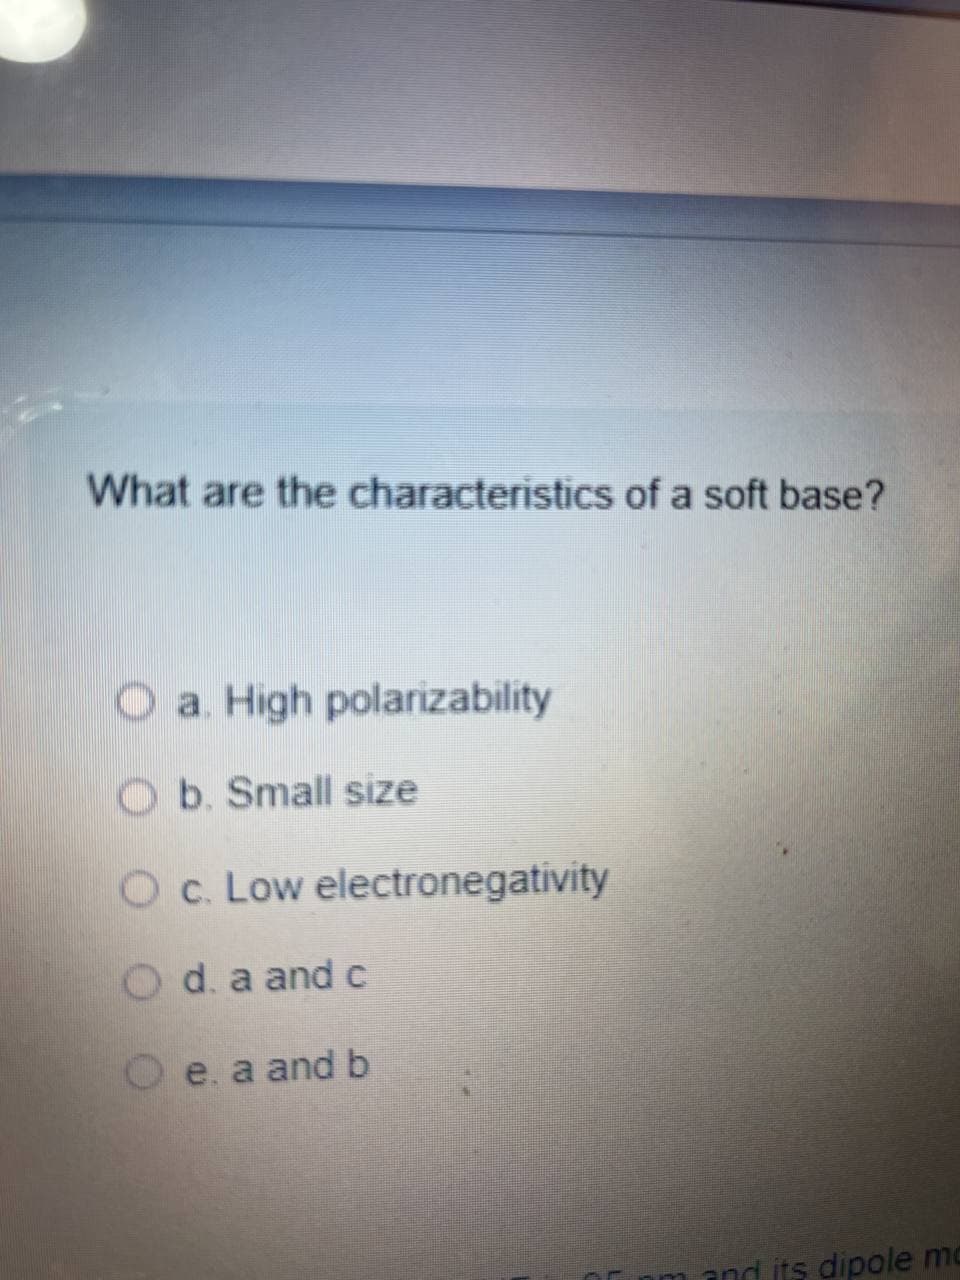 What are the characteristics of a soft base?
O a. High polarizability
O b. Small size
Oc. Low electronegativity
Od. a and c
O e. a and b
and its dipole mo
